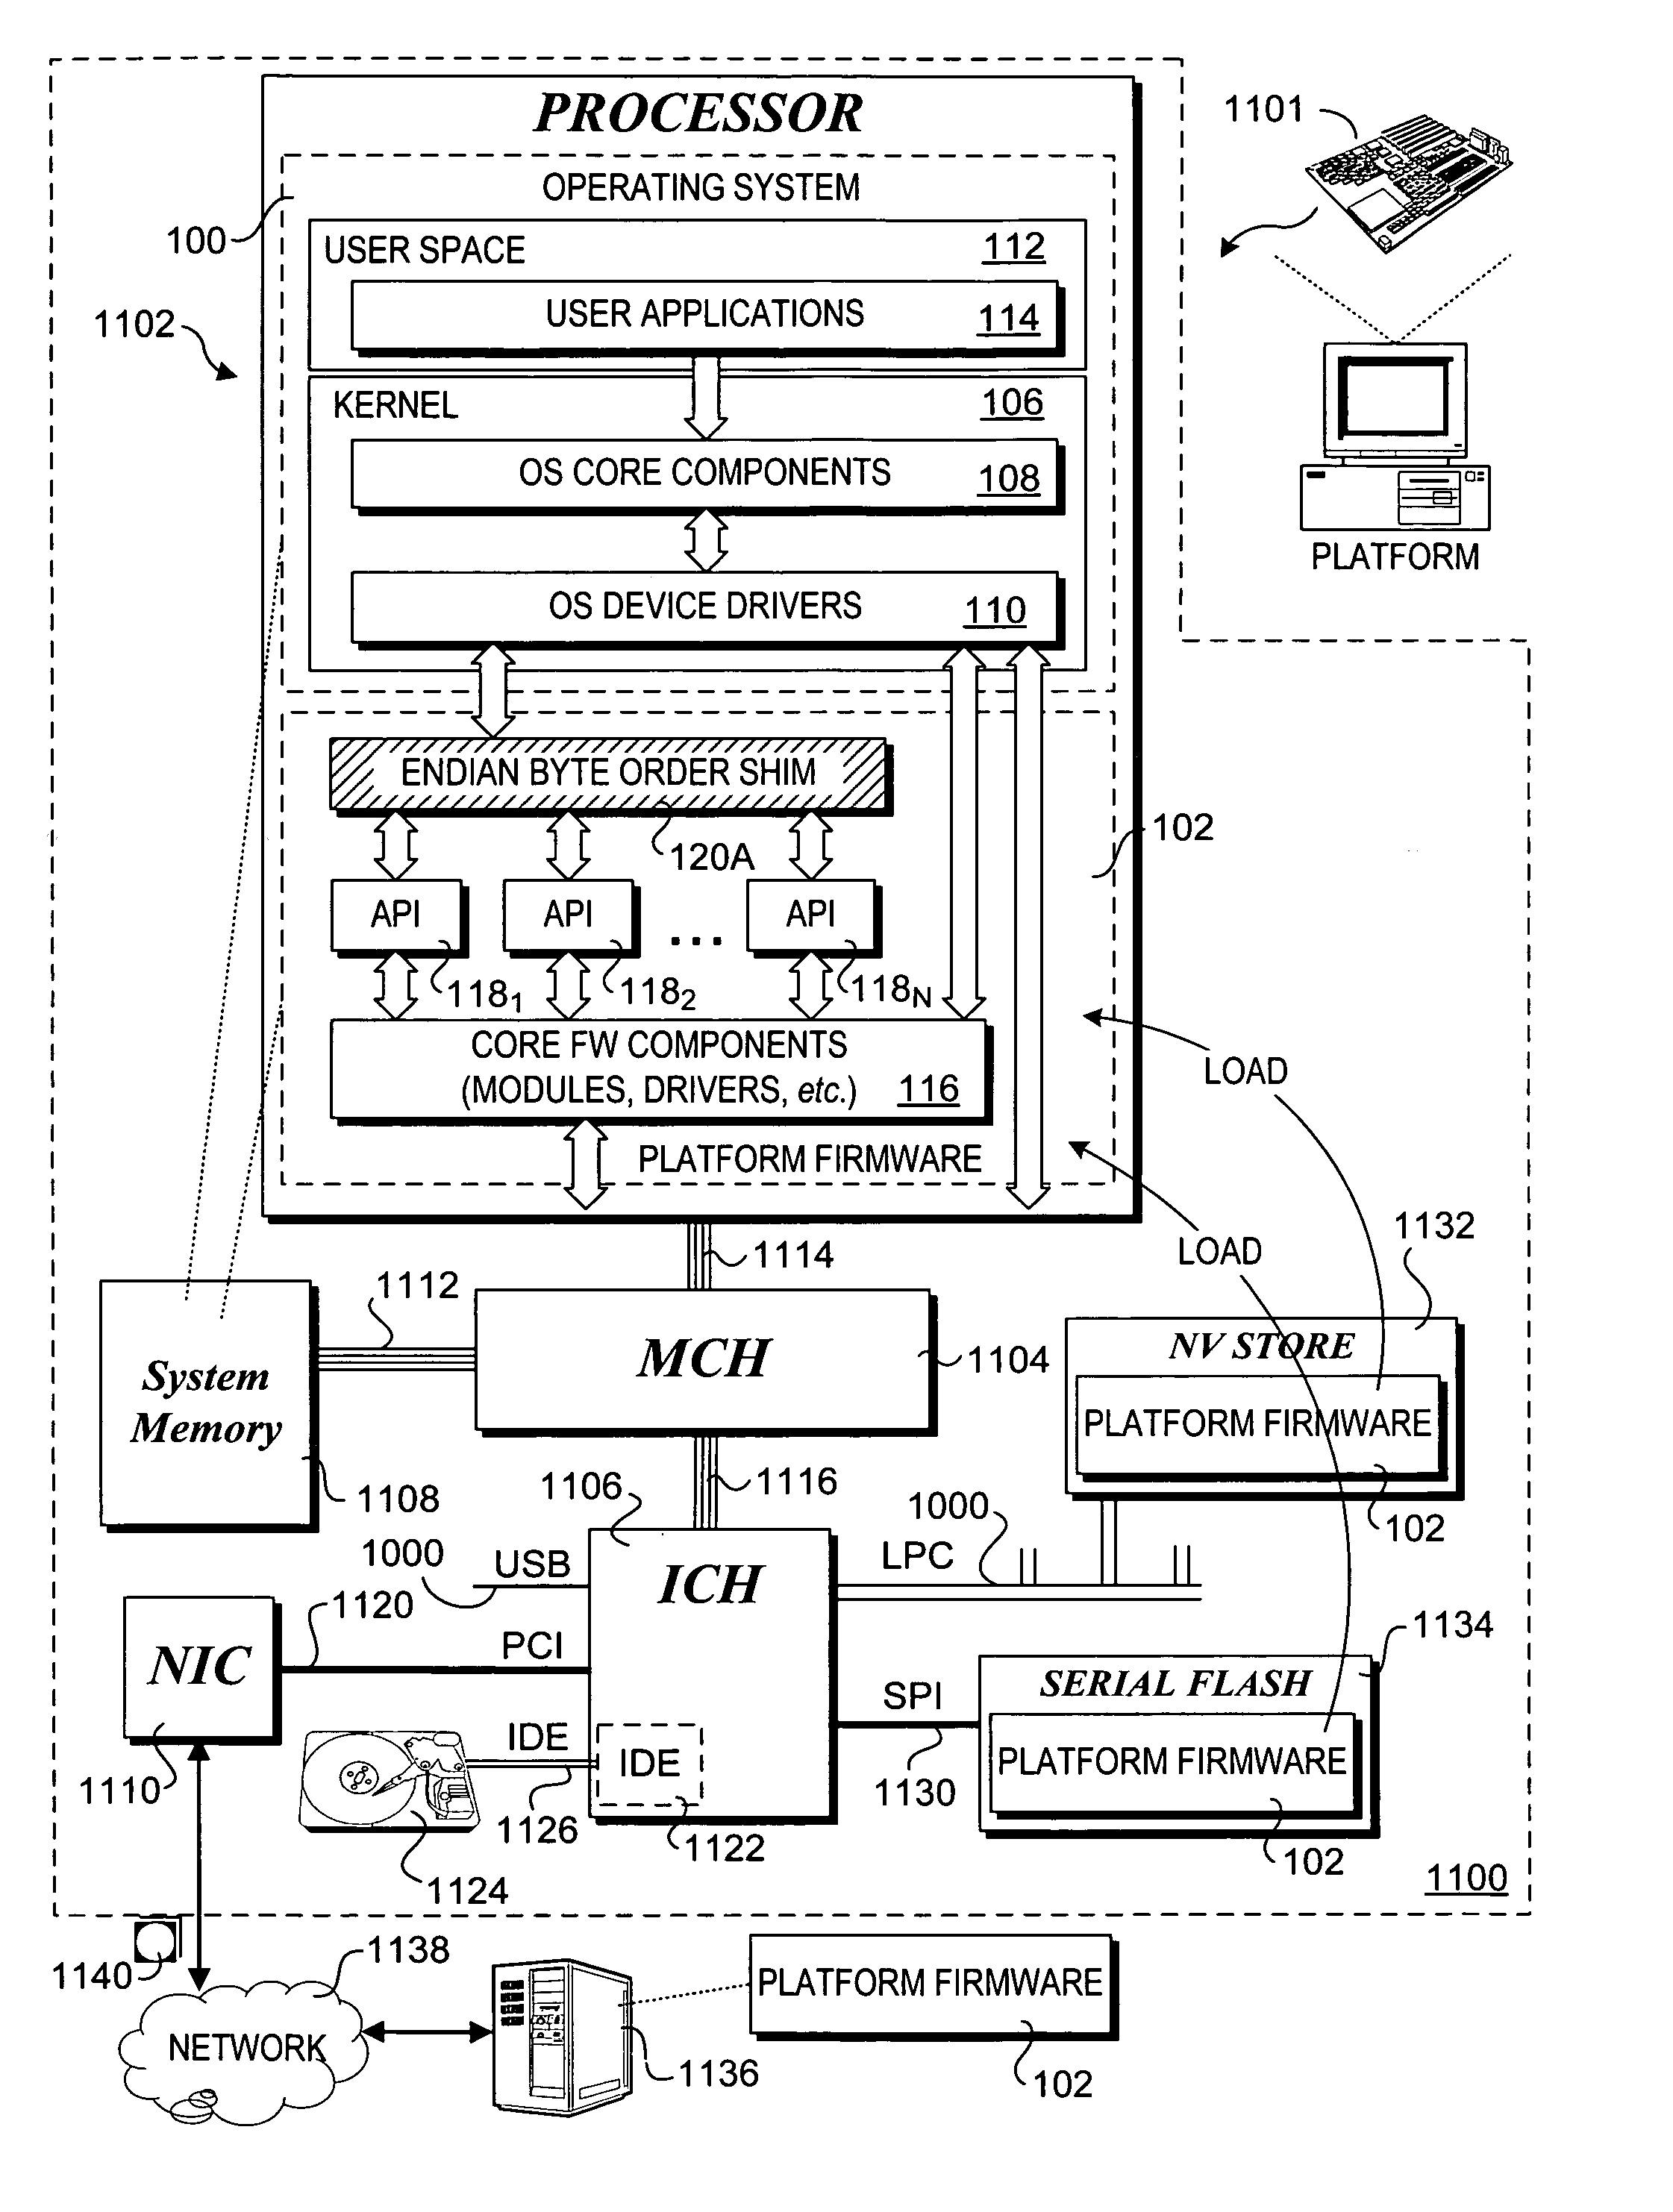 Mechanisms to support use of software running on platform hardware employing different endianness